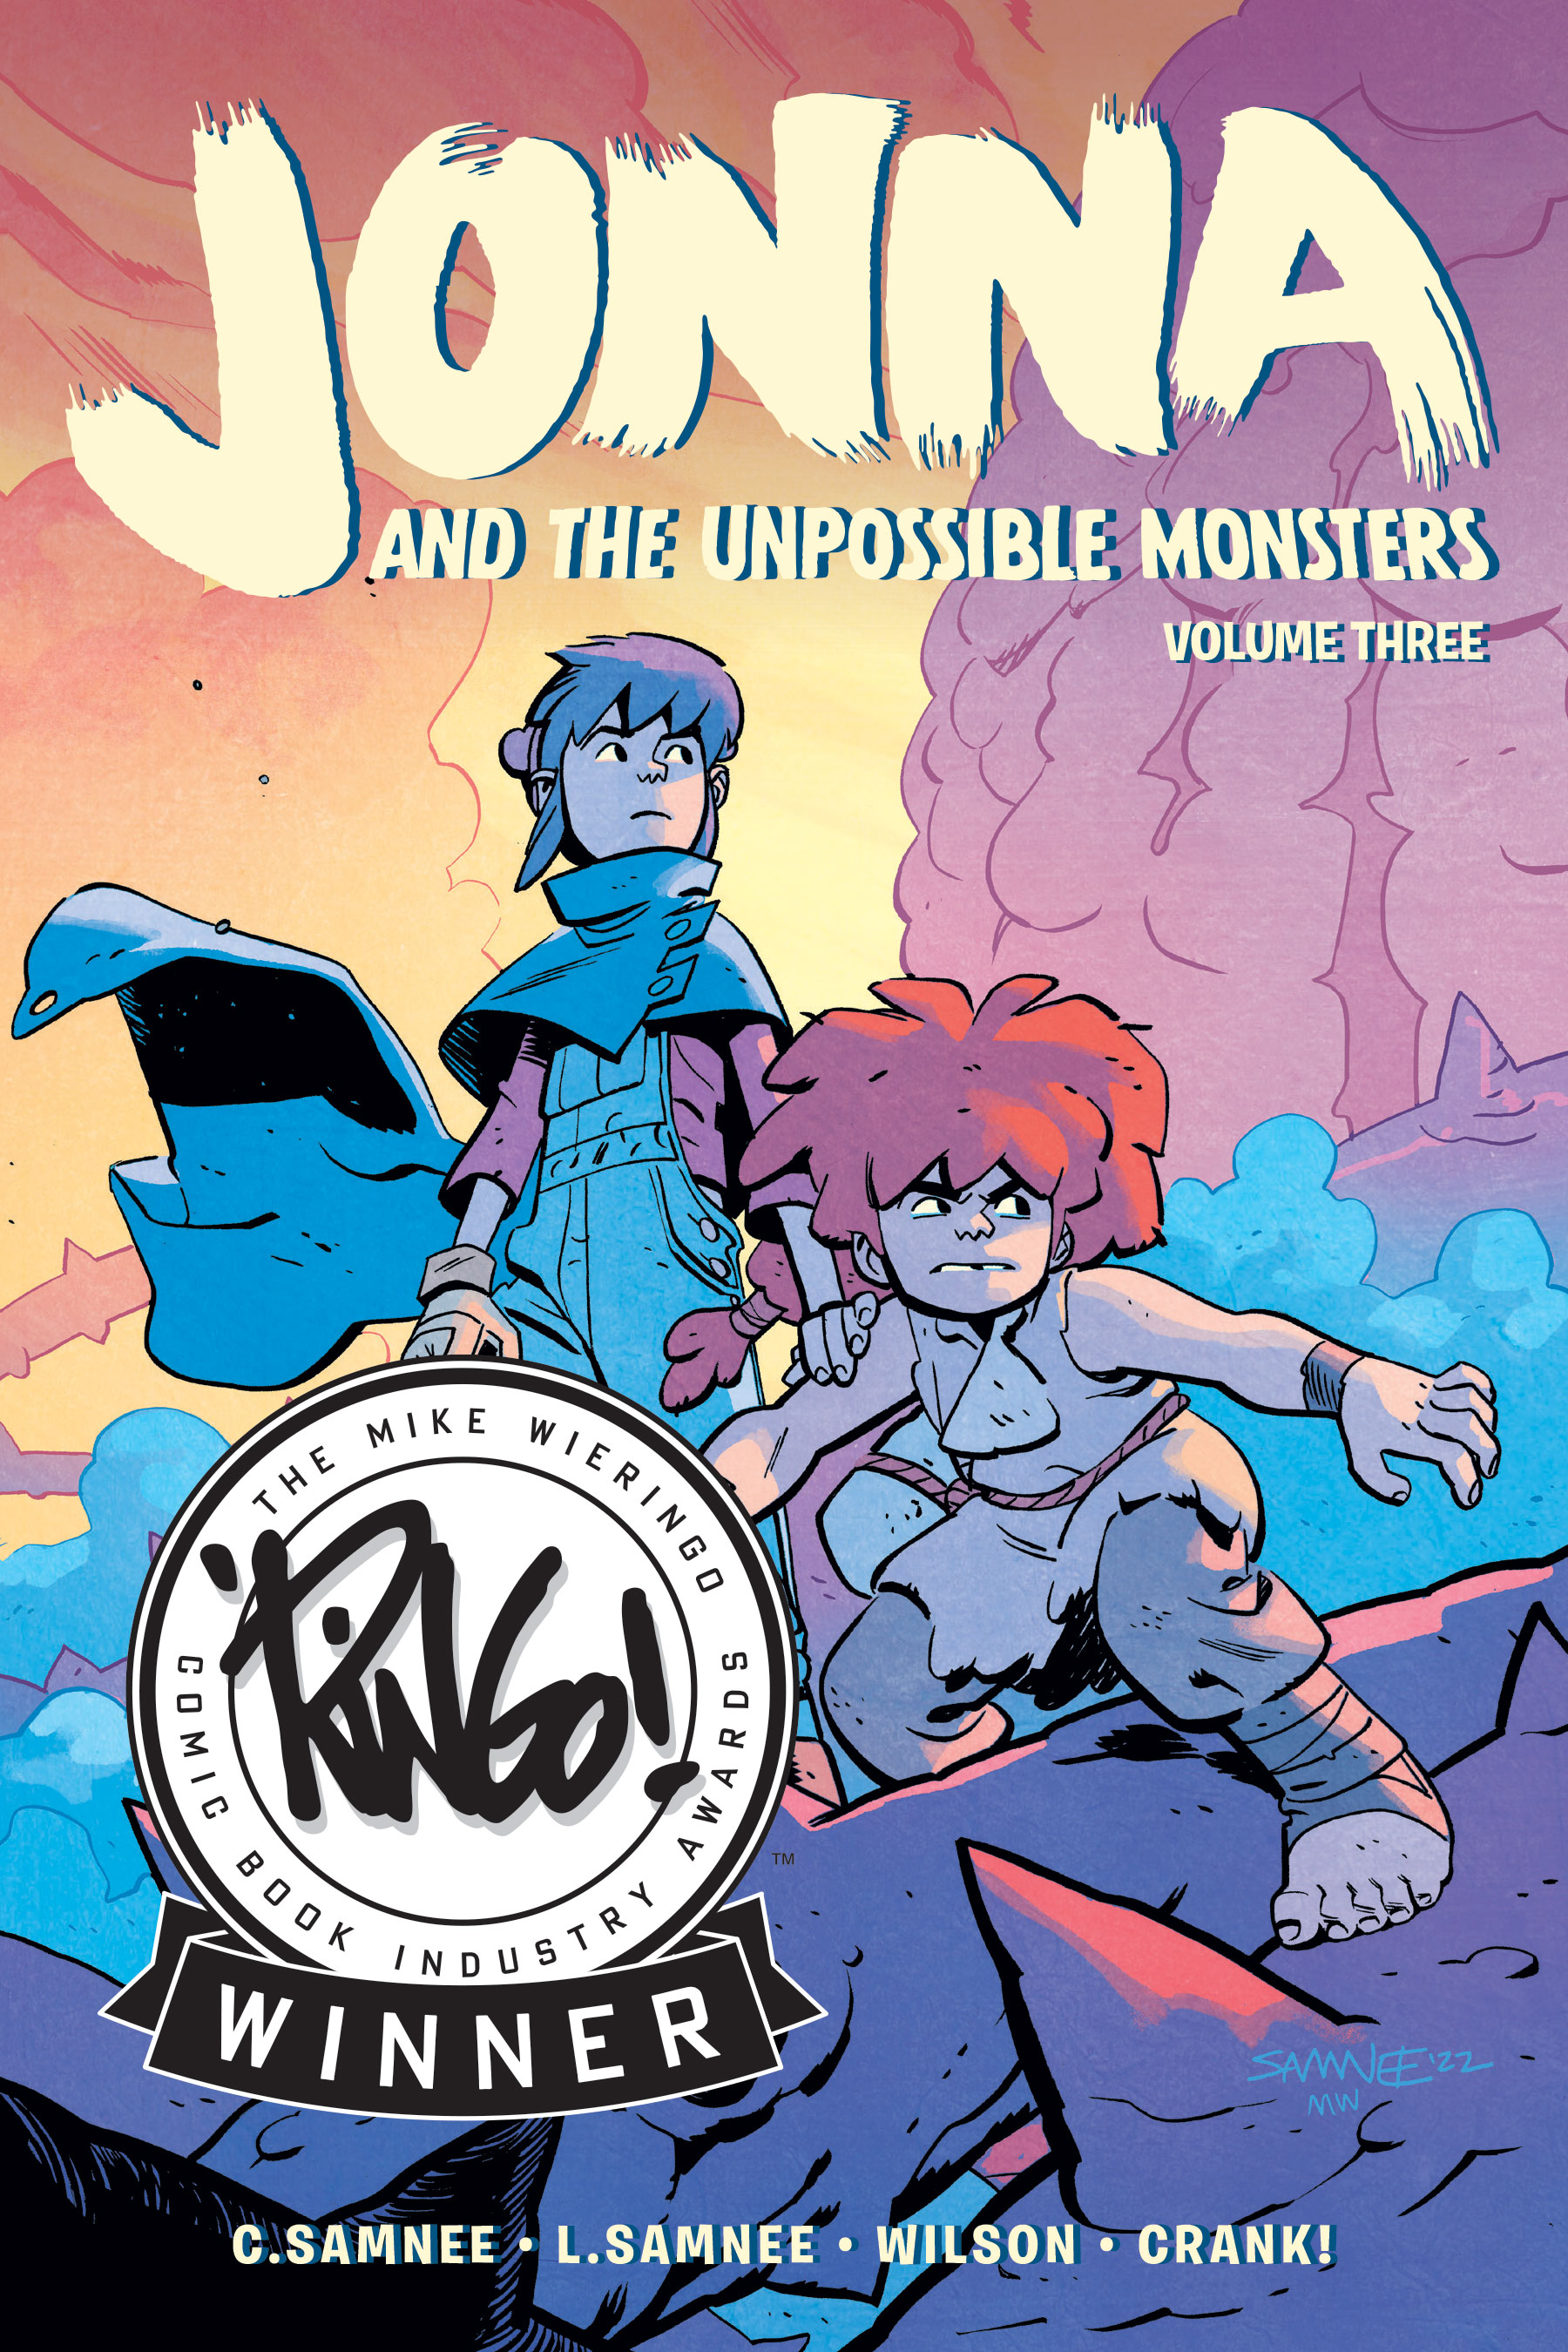 Jonna and the Unpossible Monsters Graphic Novel Volume 3